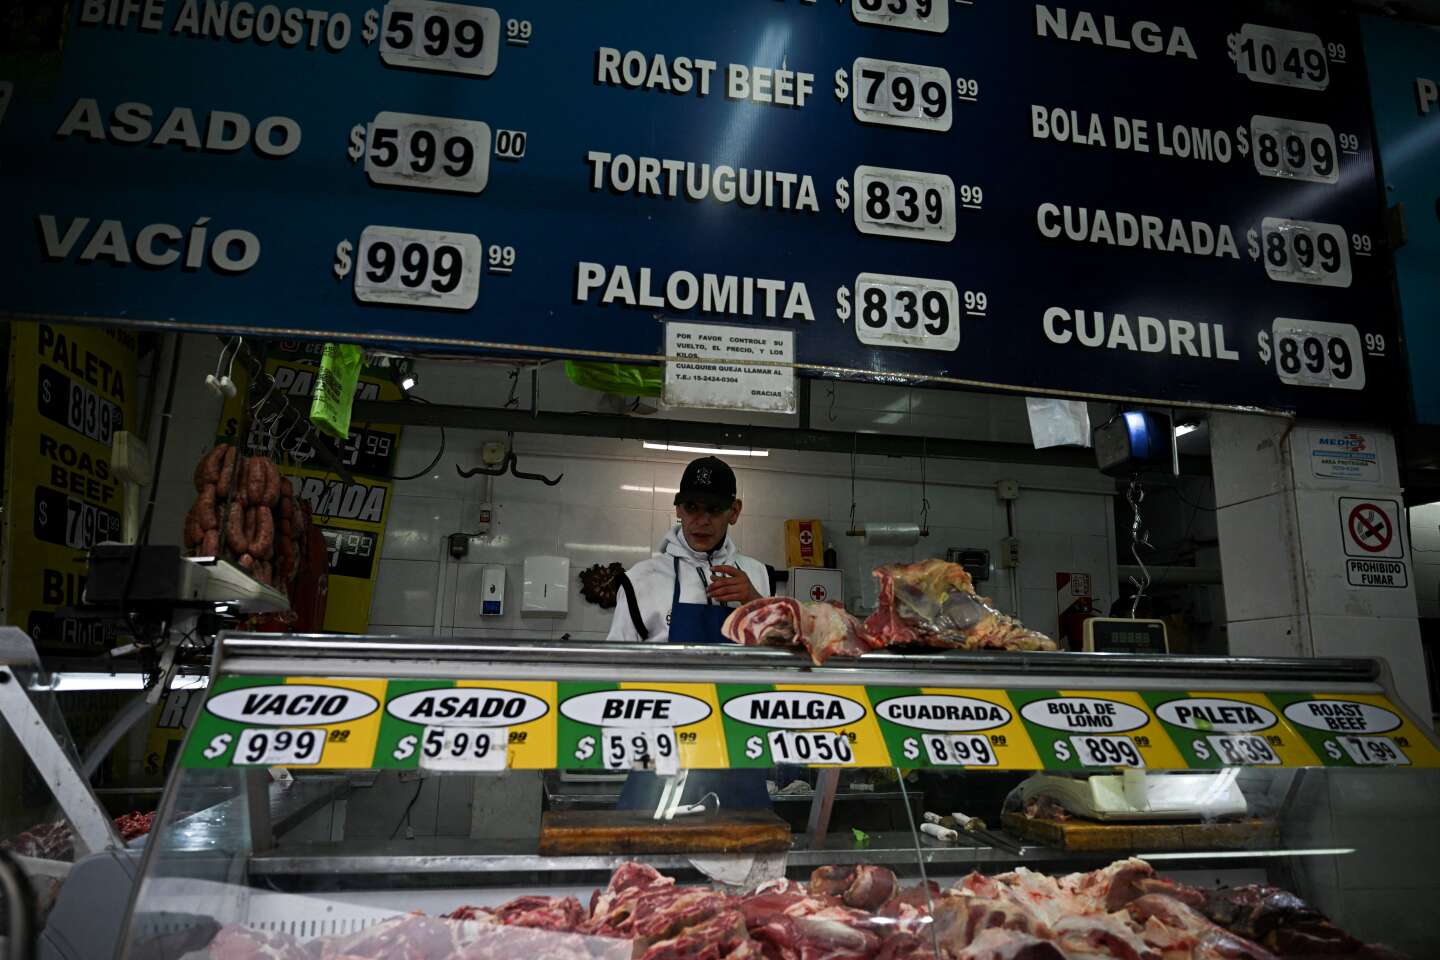 In Argentina, inflation has risen to nearly 95% by 2022